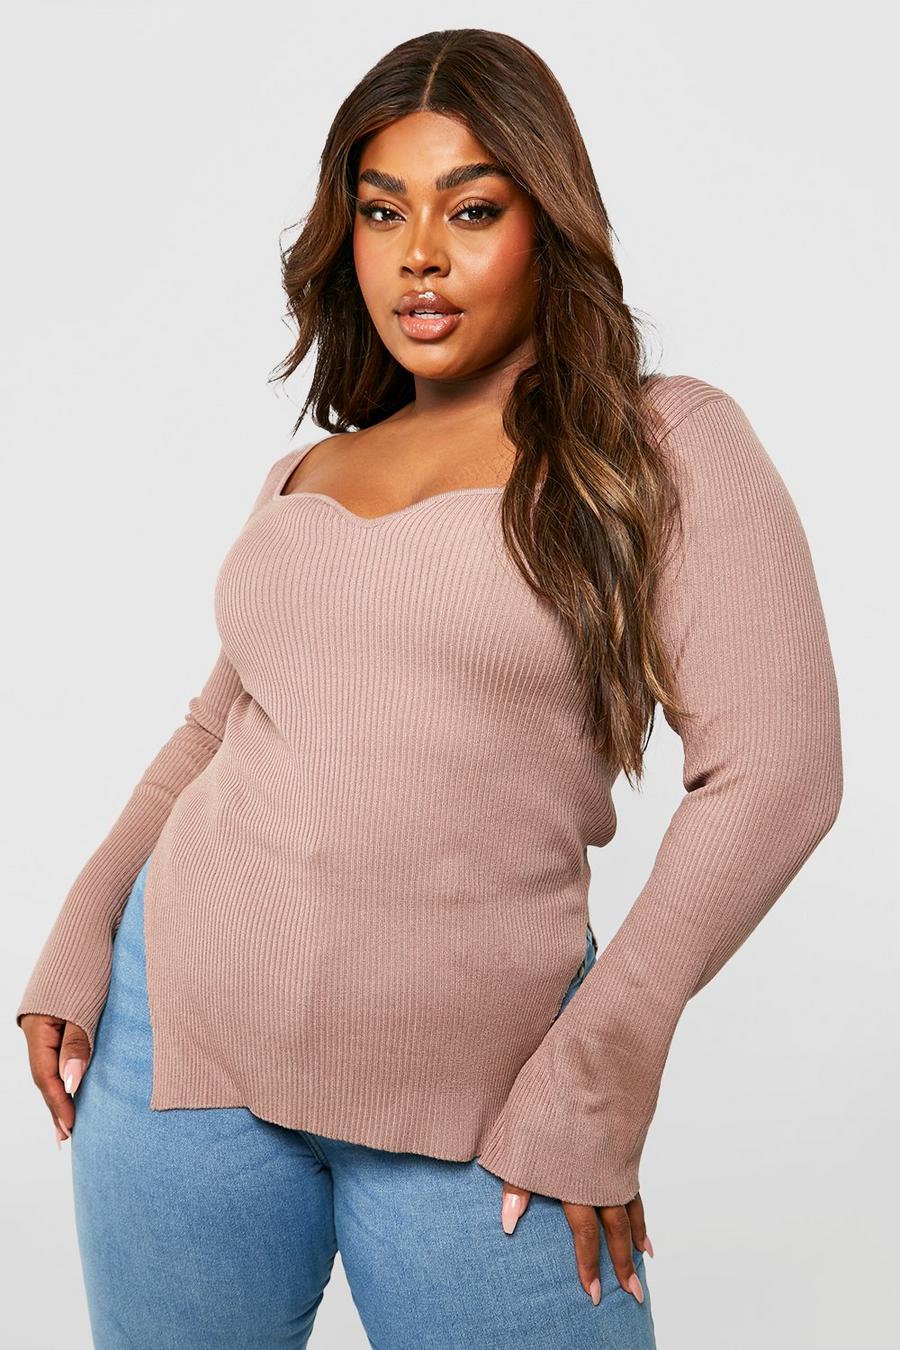 Plus Size - Foxy Ruched Sweetheart Neckline Top - Torrid